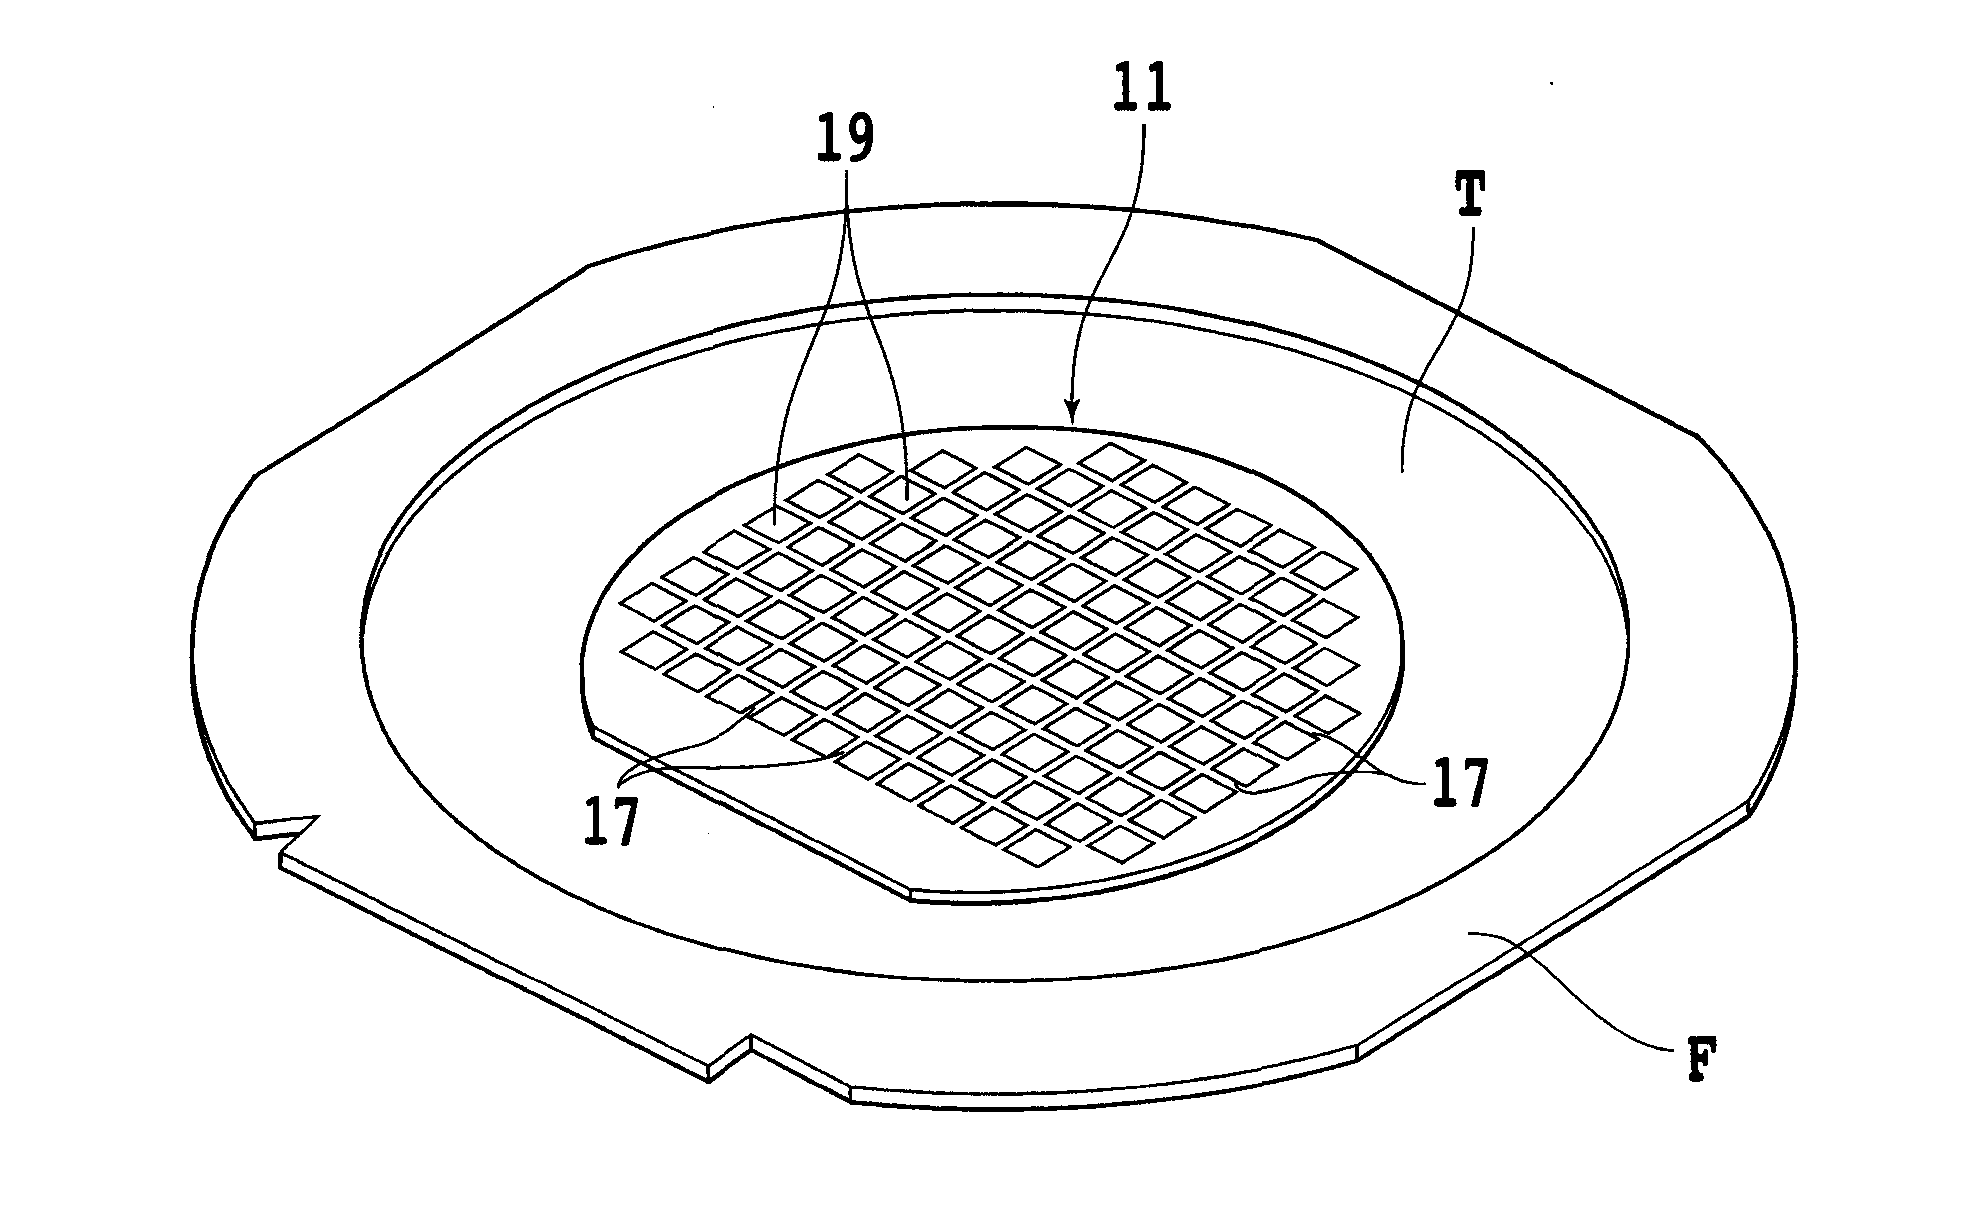 Processing method for wafer